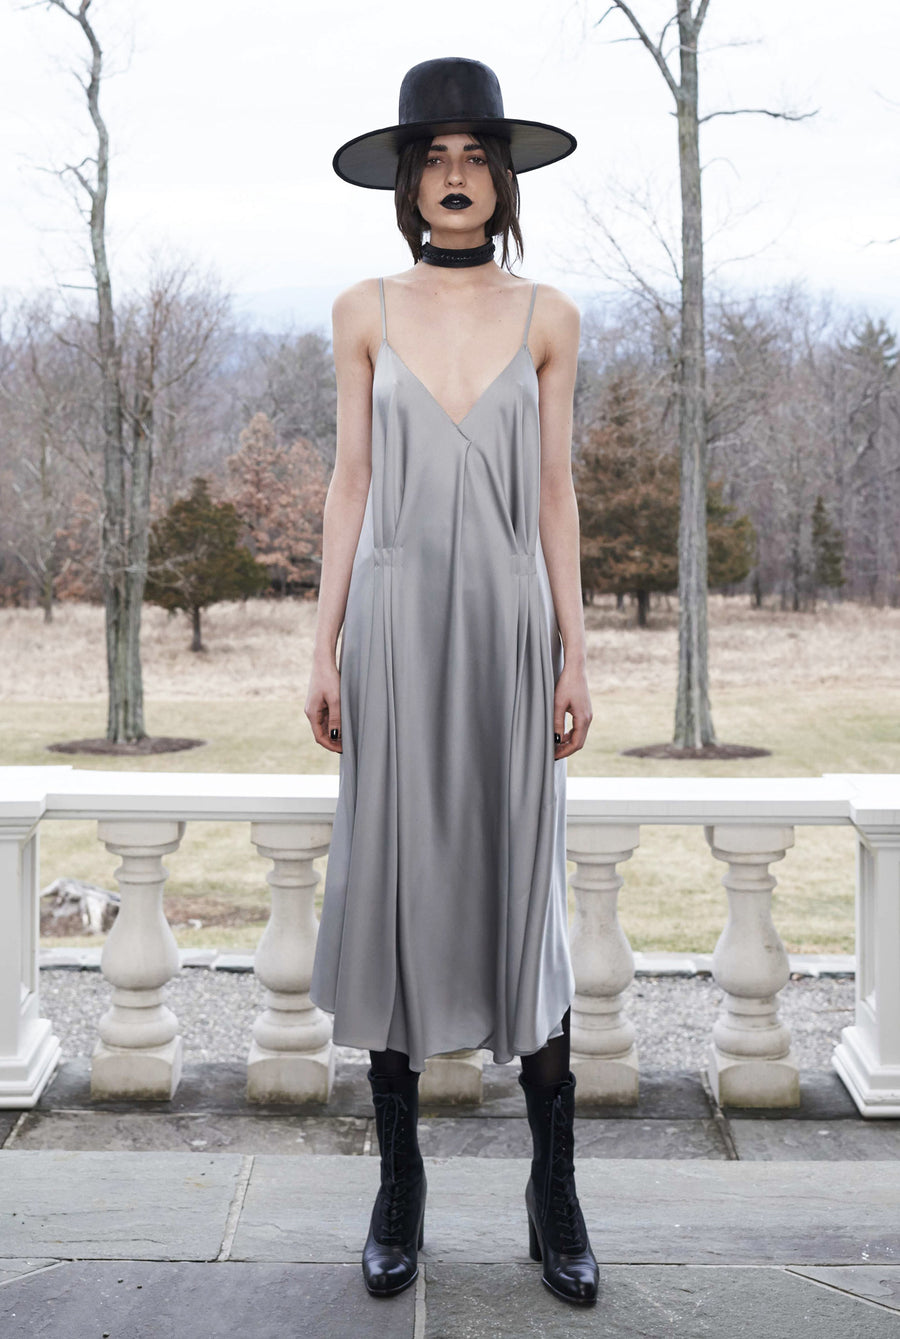 Vanessa M. IMG Model Wendy Nichol Clothing Designer Made to Order Custom Tailoring Made to Measure Handmade in NYC New York City Fashion Runway Show AW16 13 Incarnations Silver Gray Lavender Purple Silk Charmeuse Deep V Slip Dress Short plunge Neck Open low Back 